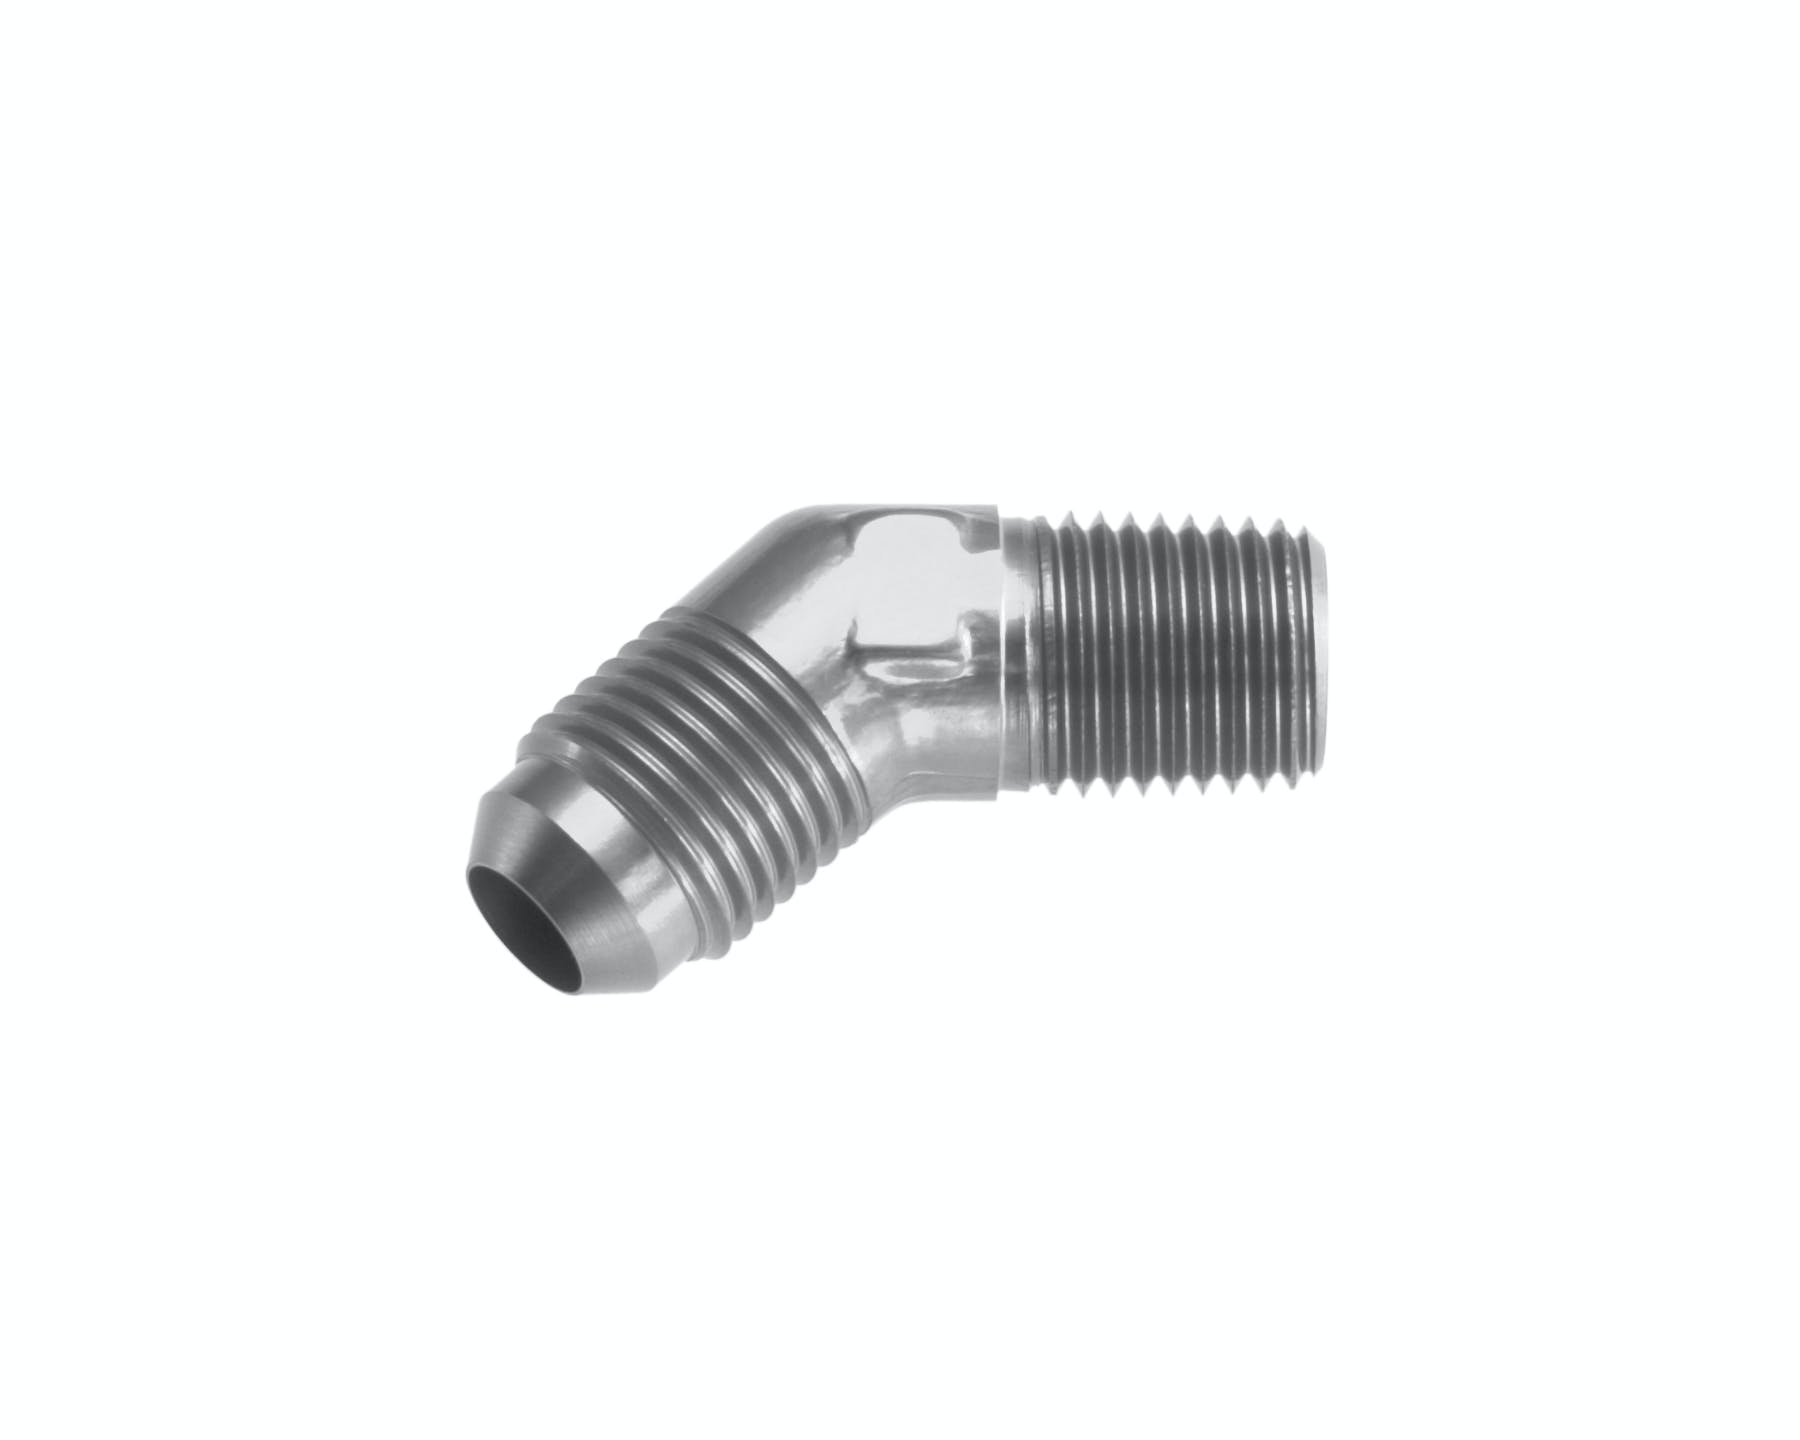 Redhorse Performance 823-08-12-5 -08 45 degree Male adapter to -12 (3/4in) NPT Male - clear